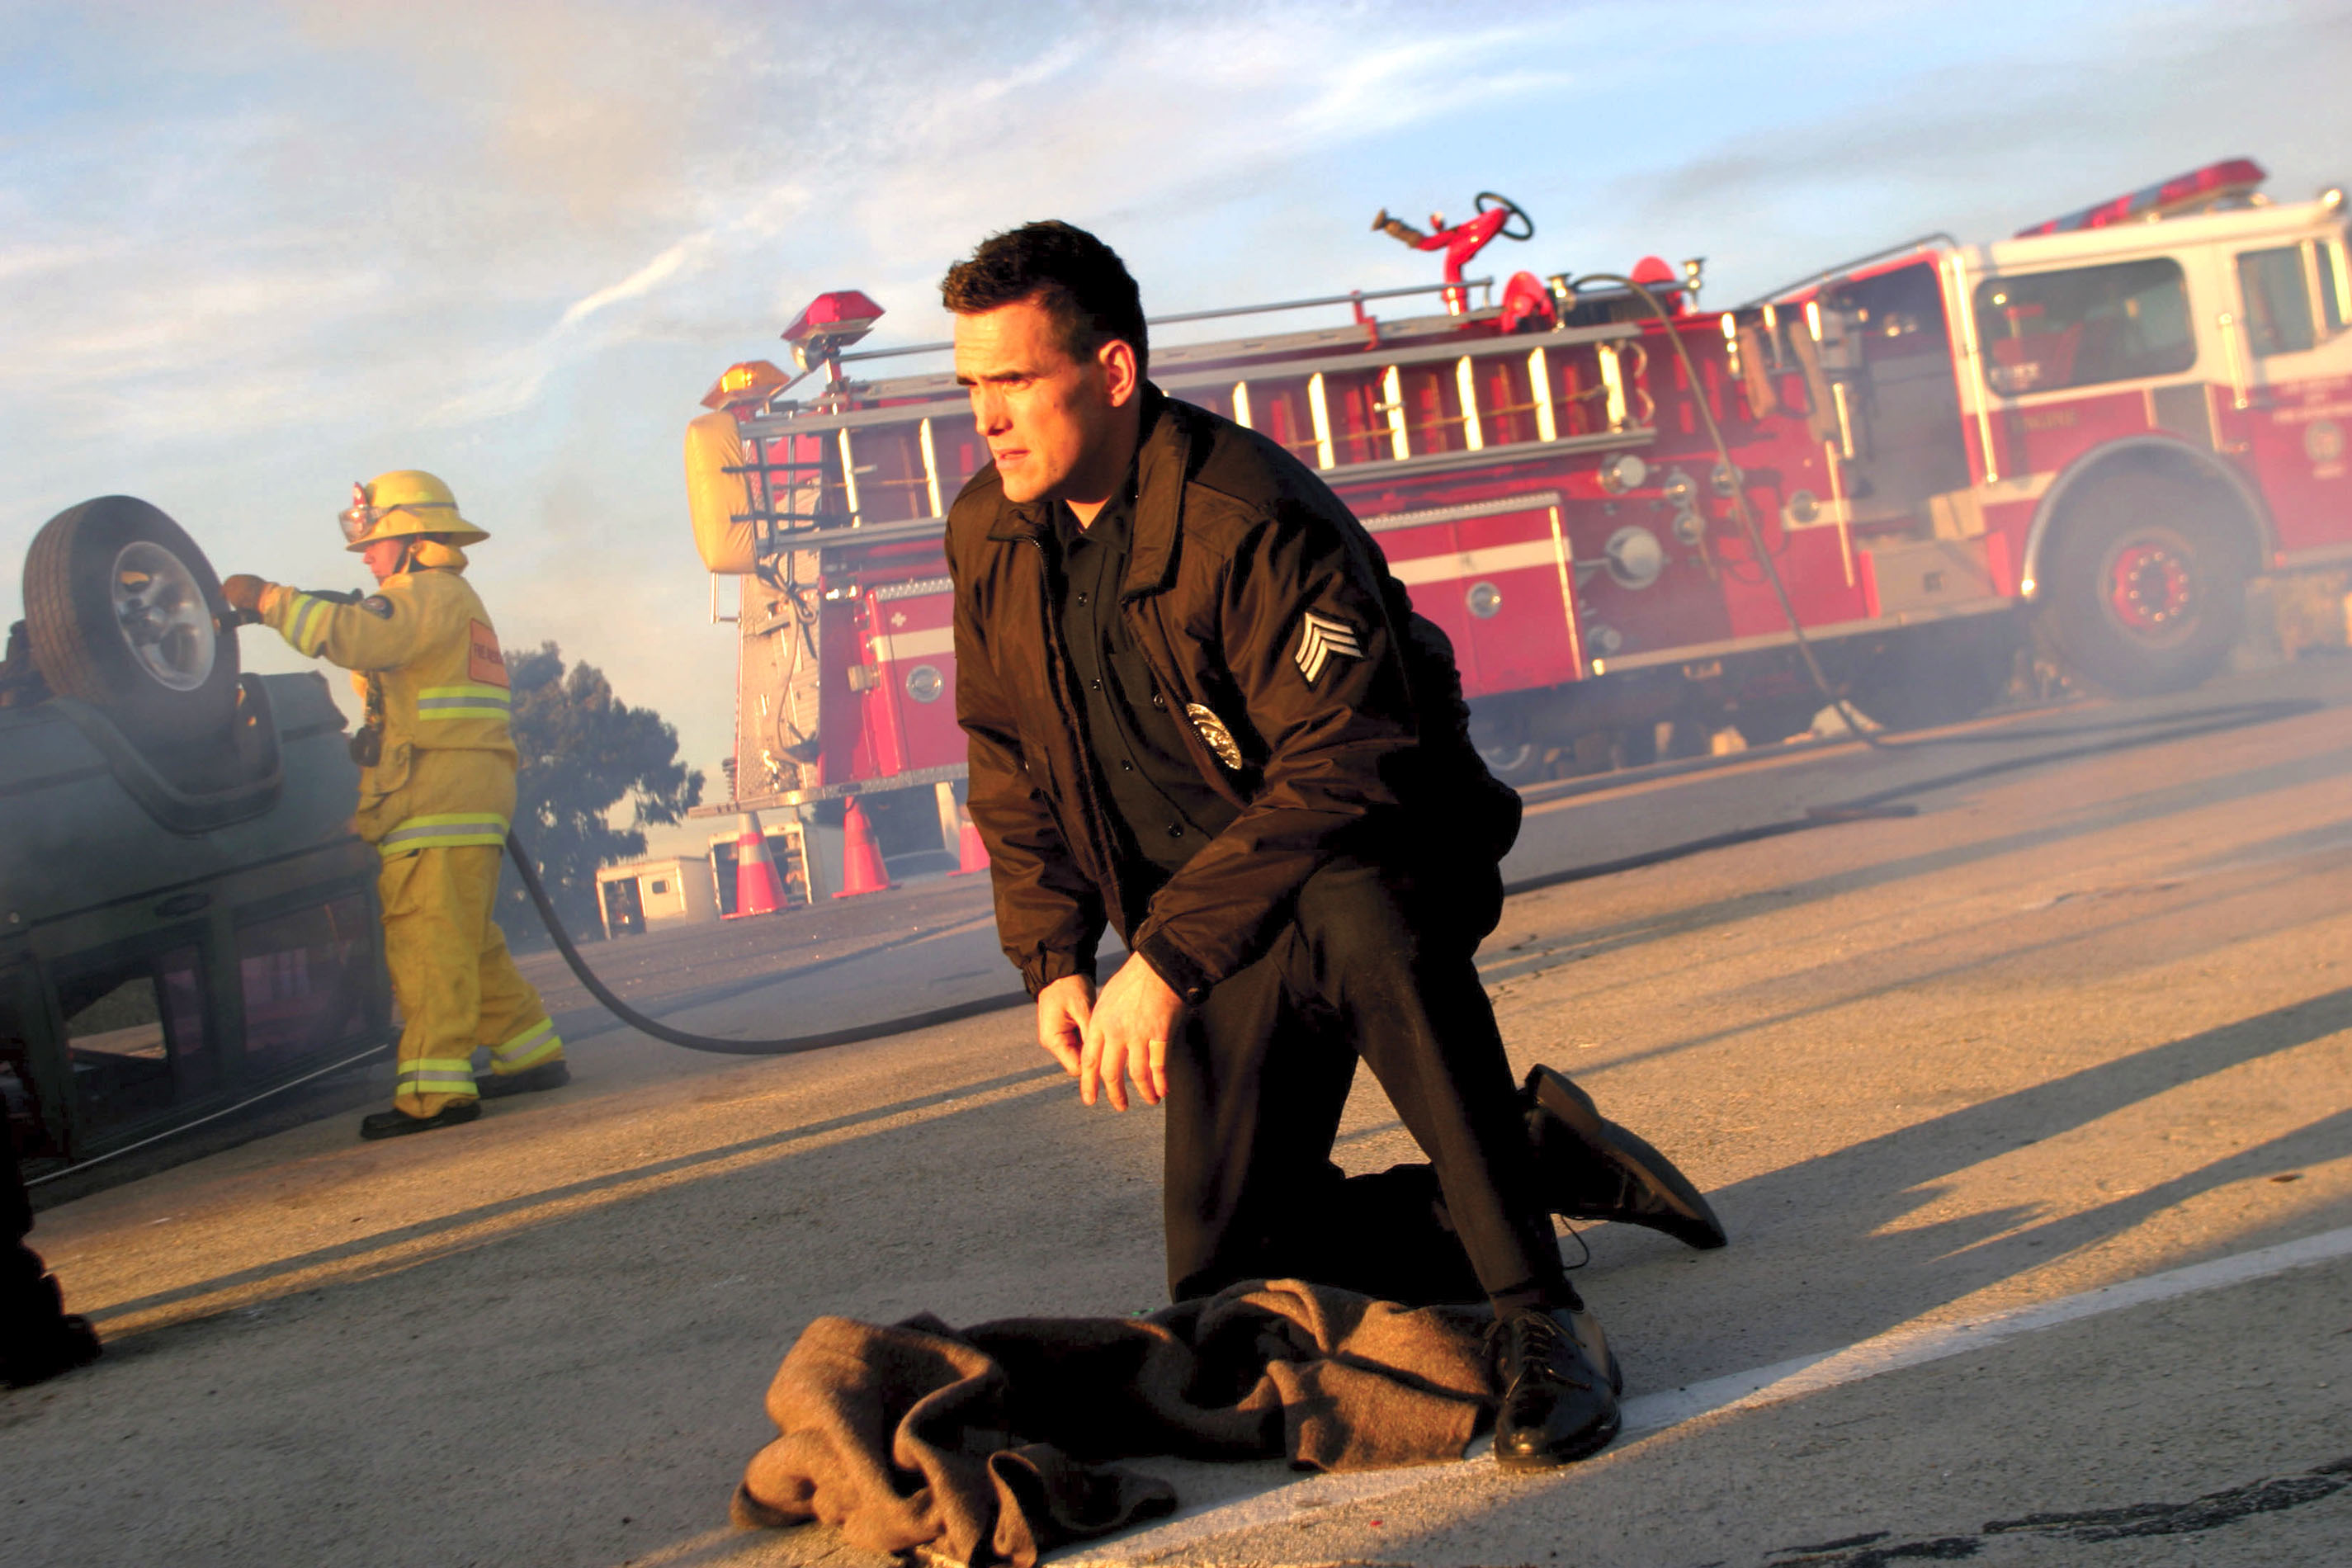 Firefighters in action, Matt Dillon as Officer John Ryan, kneeling in foreground with equipment, a fire truck, and a colleague in background